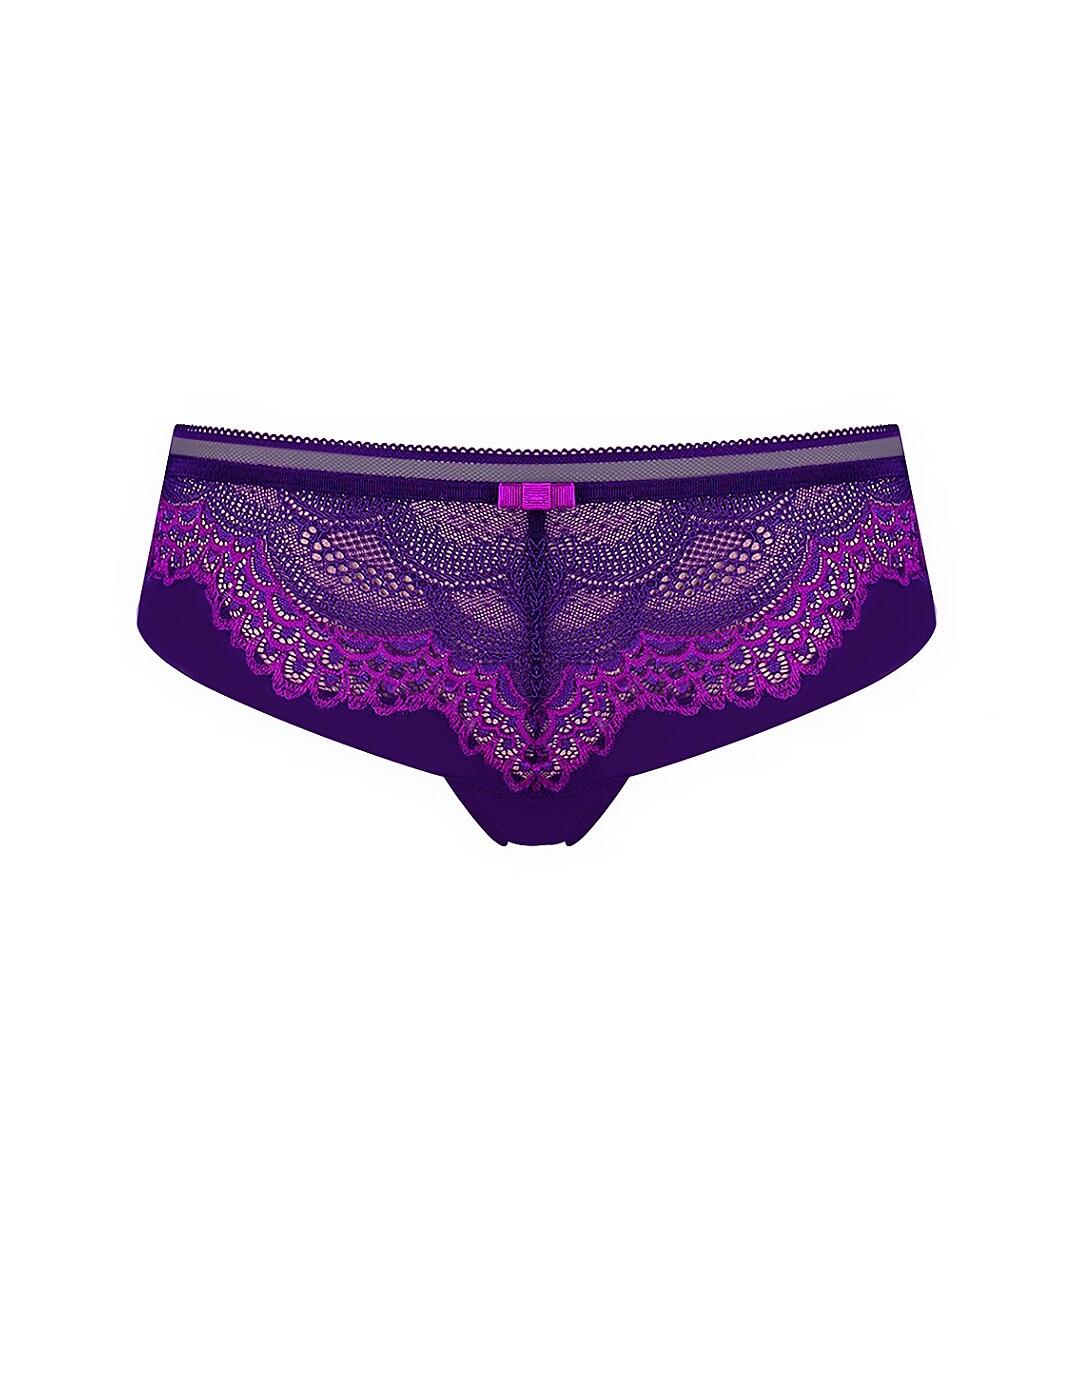 Triumph Beauty-Full Darling Hipster Brief 10156817 New Lingerie Womens ...